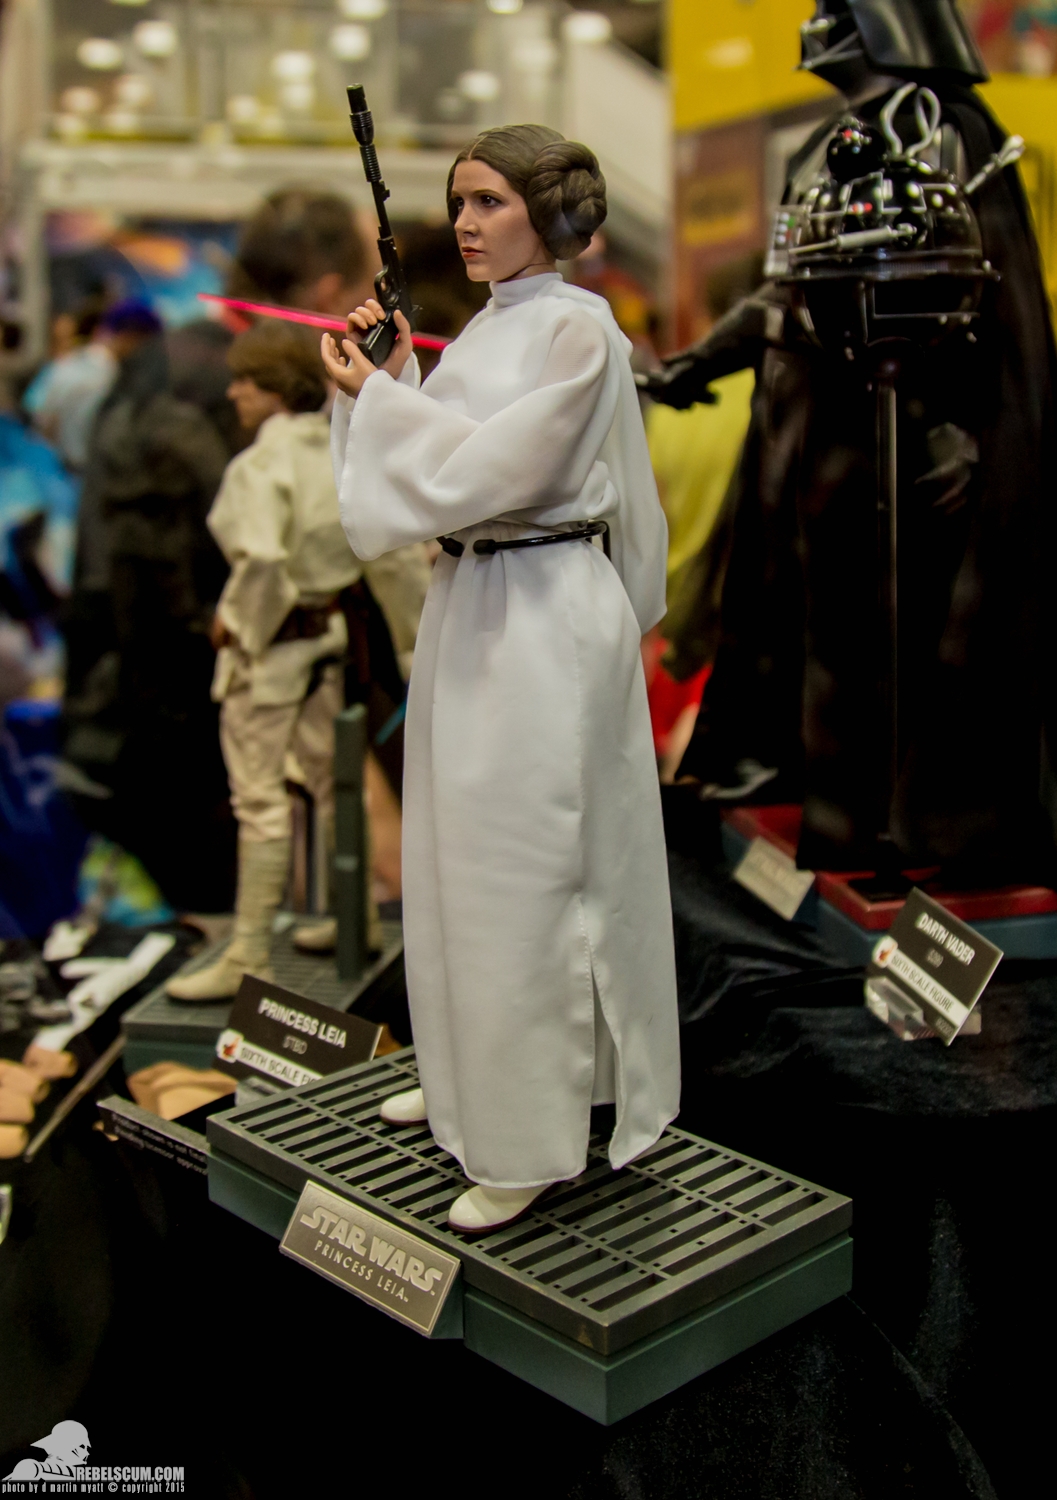 http://www.rebelscum.com/2015-SDCC/Hot-Toys-Display-2015-San-Diego-Comic-Con-SDCC/Hot-Toys-Display-2015-San-Diego-Comic-Con-SDCC-025.jpg